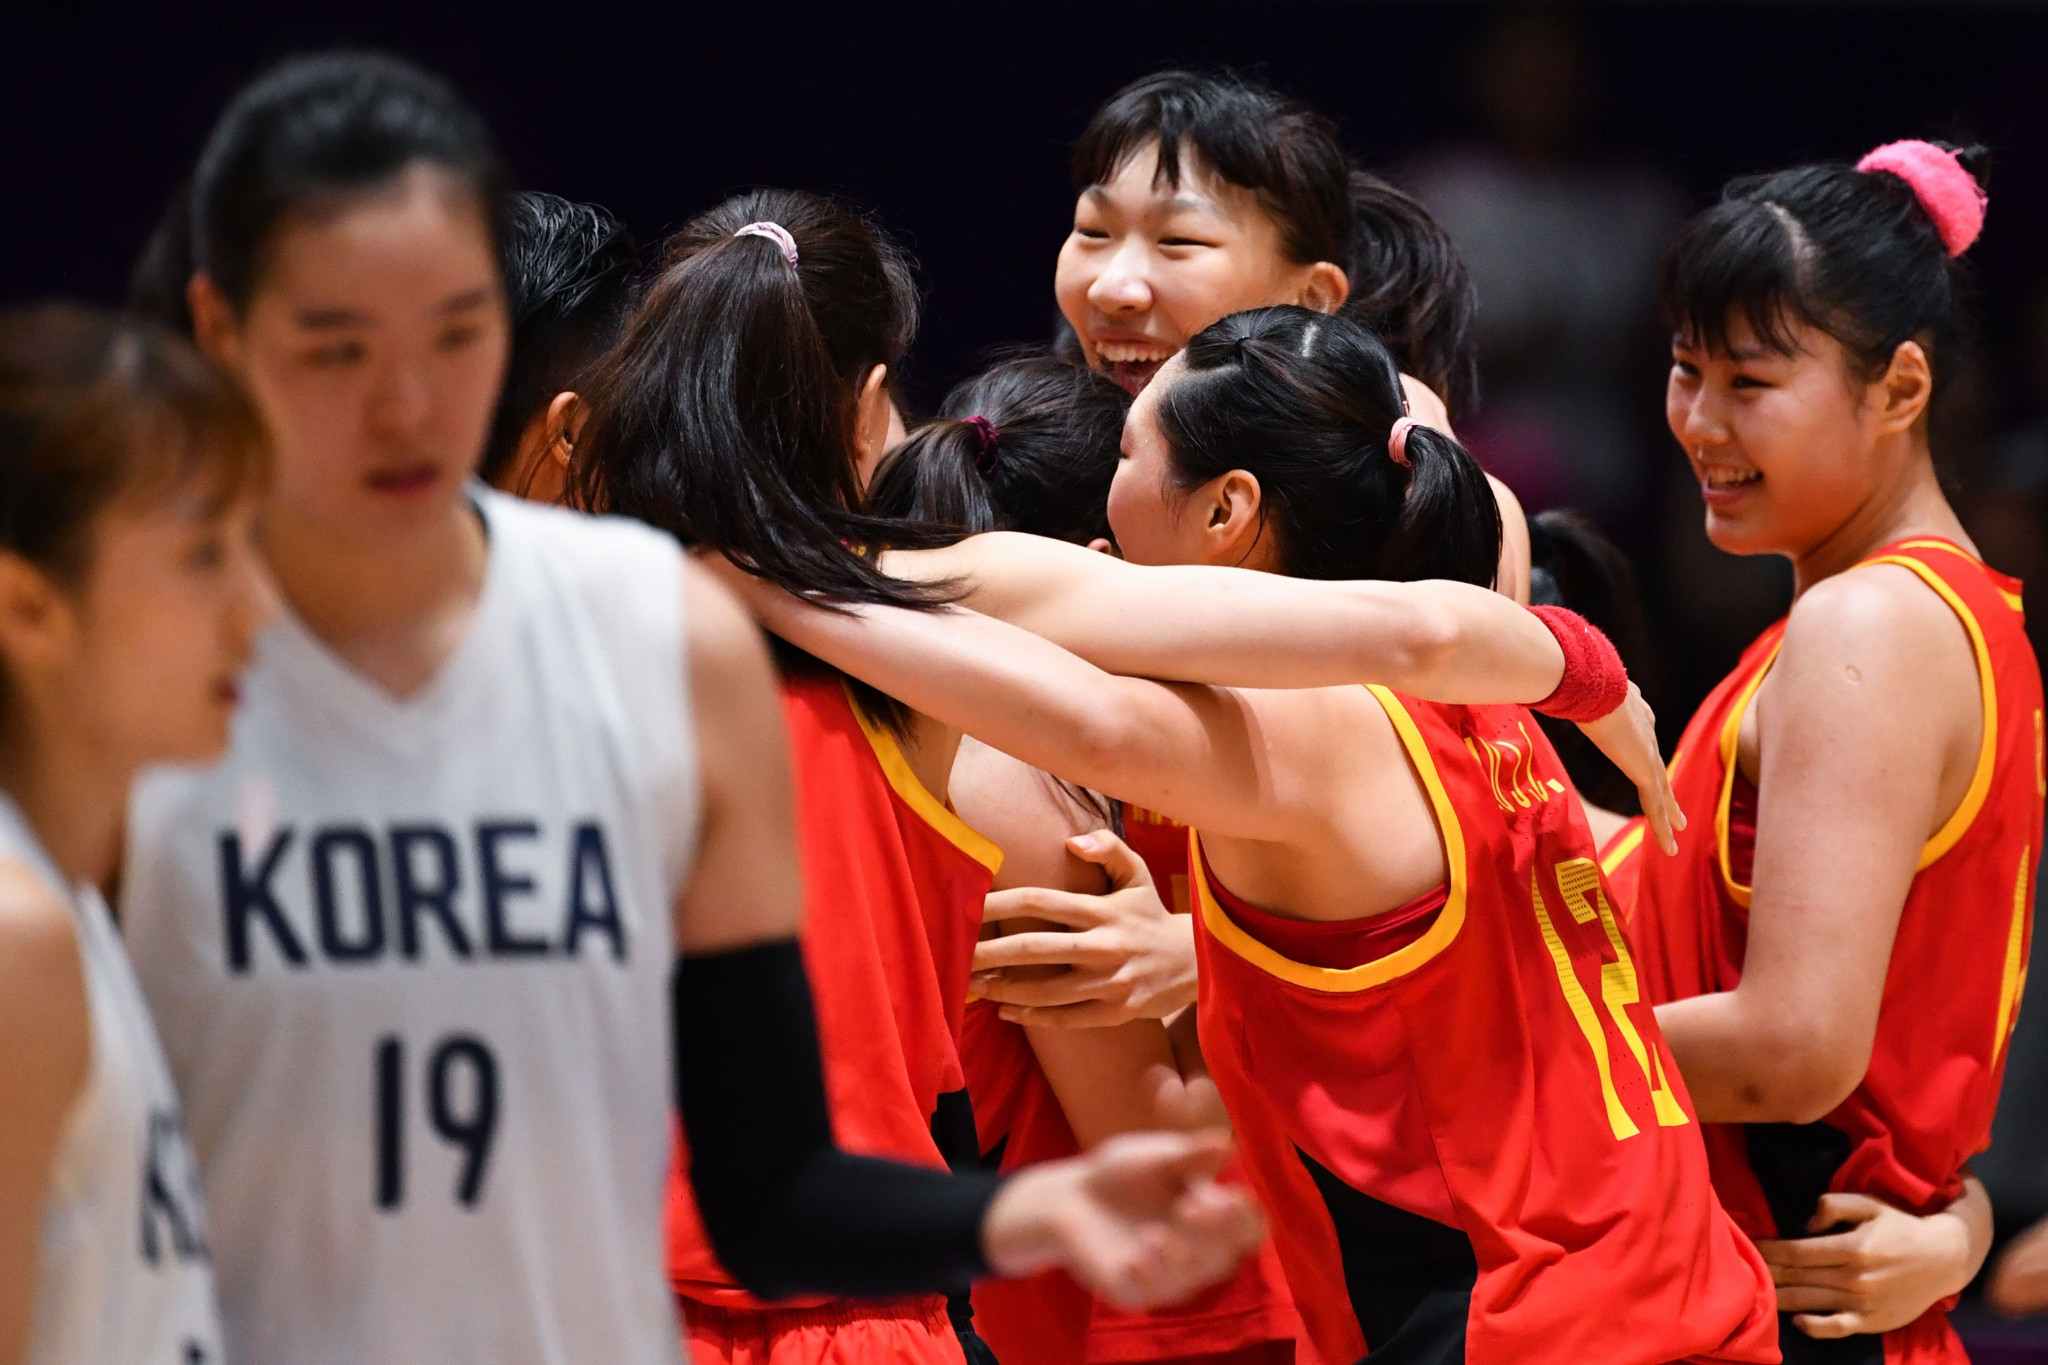 China denied unified Korea a dream ending by winning the women’s basketball final on day 14 of the 2018 Asian Games in Jakarta and Palembang ©Getty Images